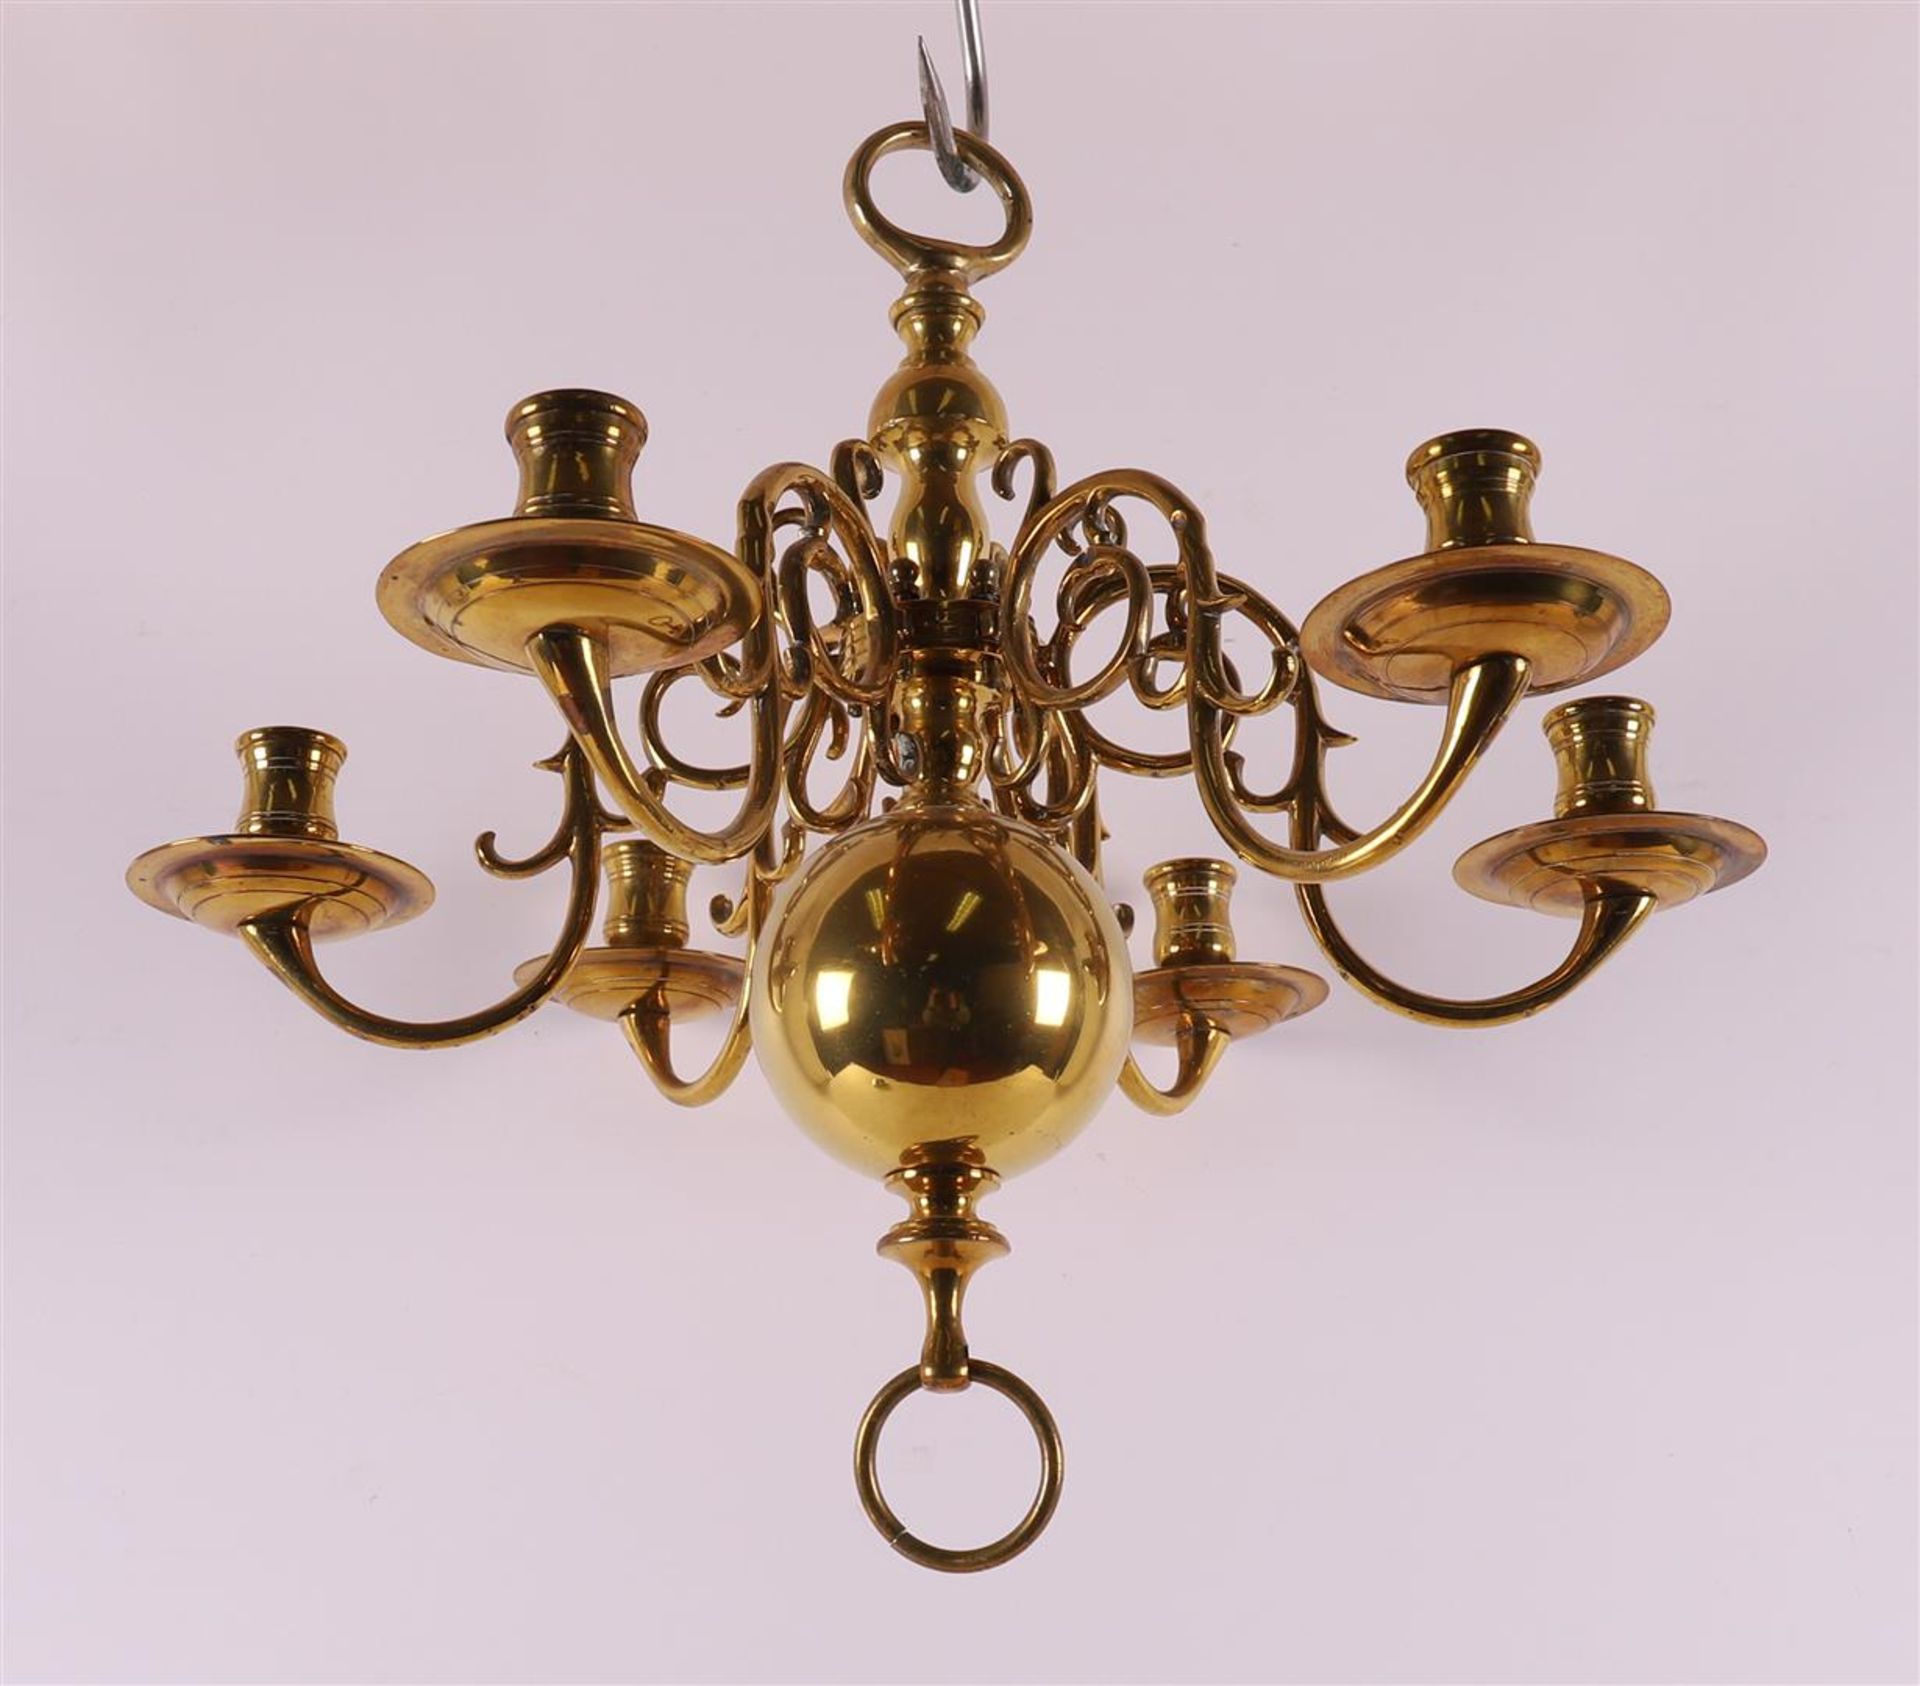 A brass six-armed spherical crown, after an antique example, around 1900. - Image 3 of 3